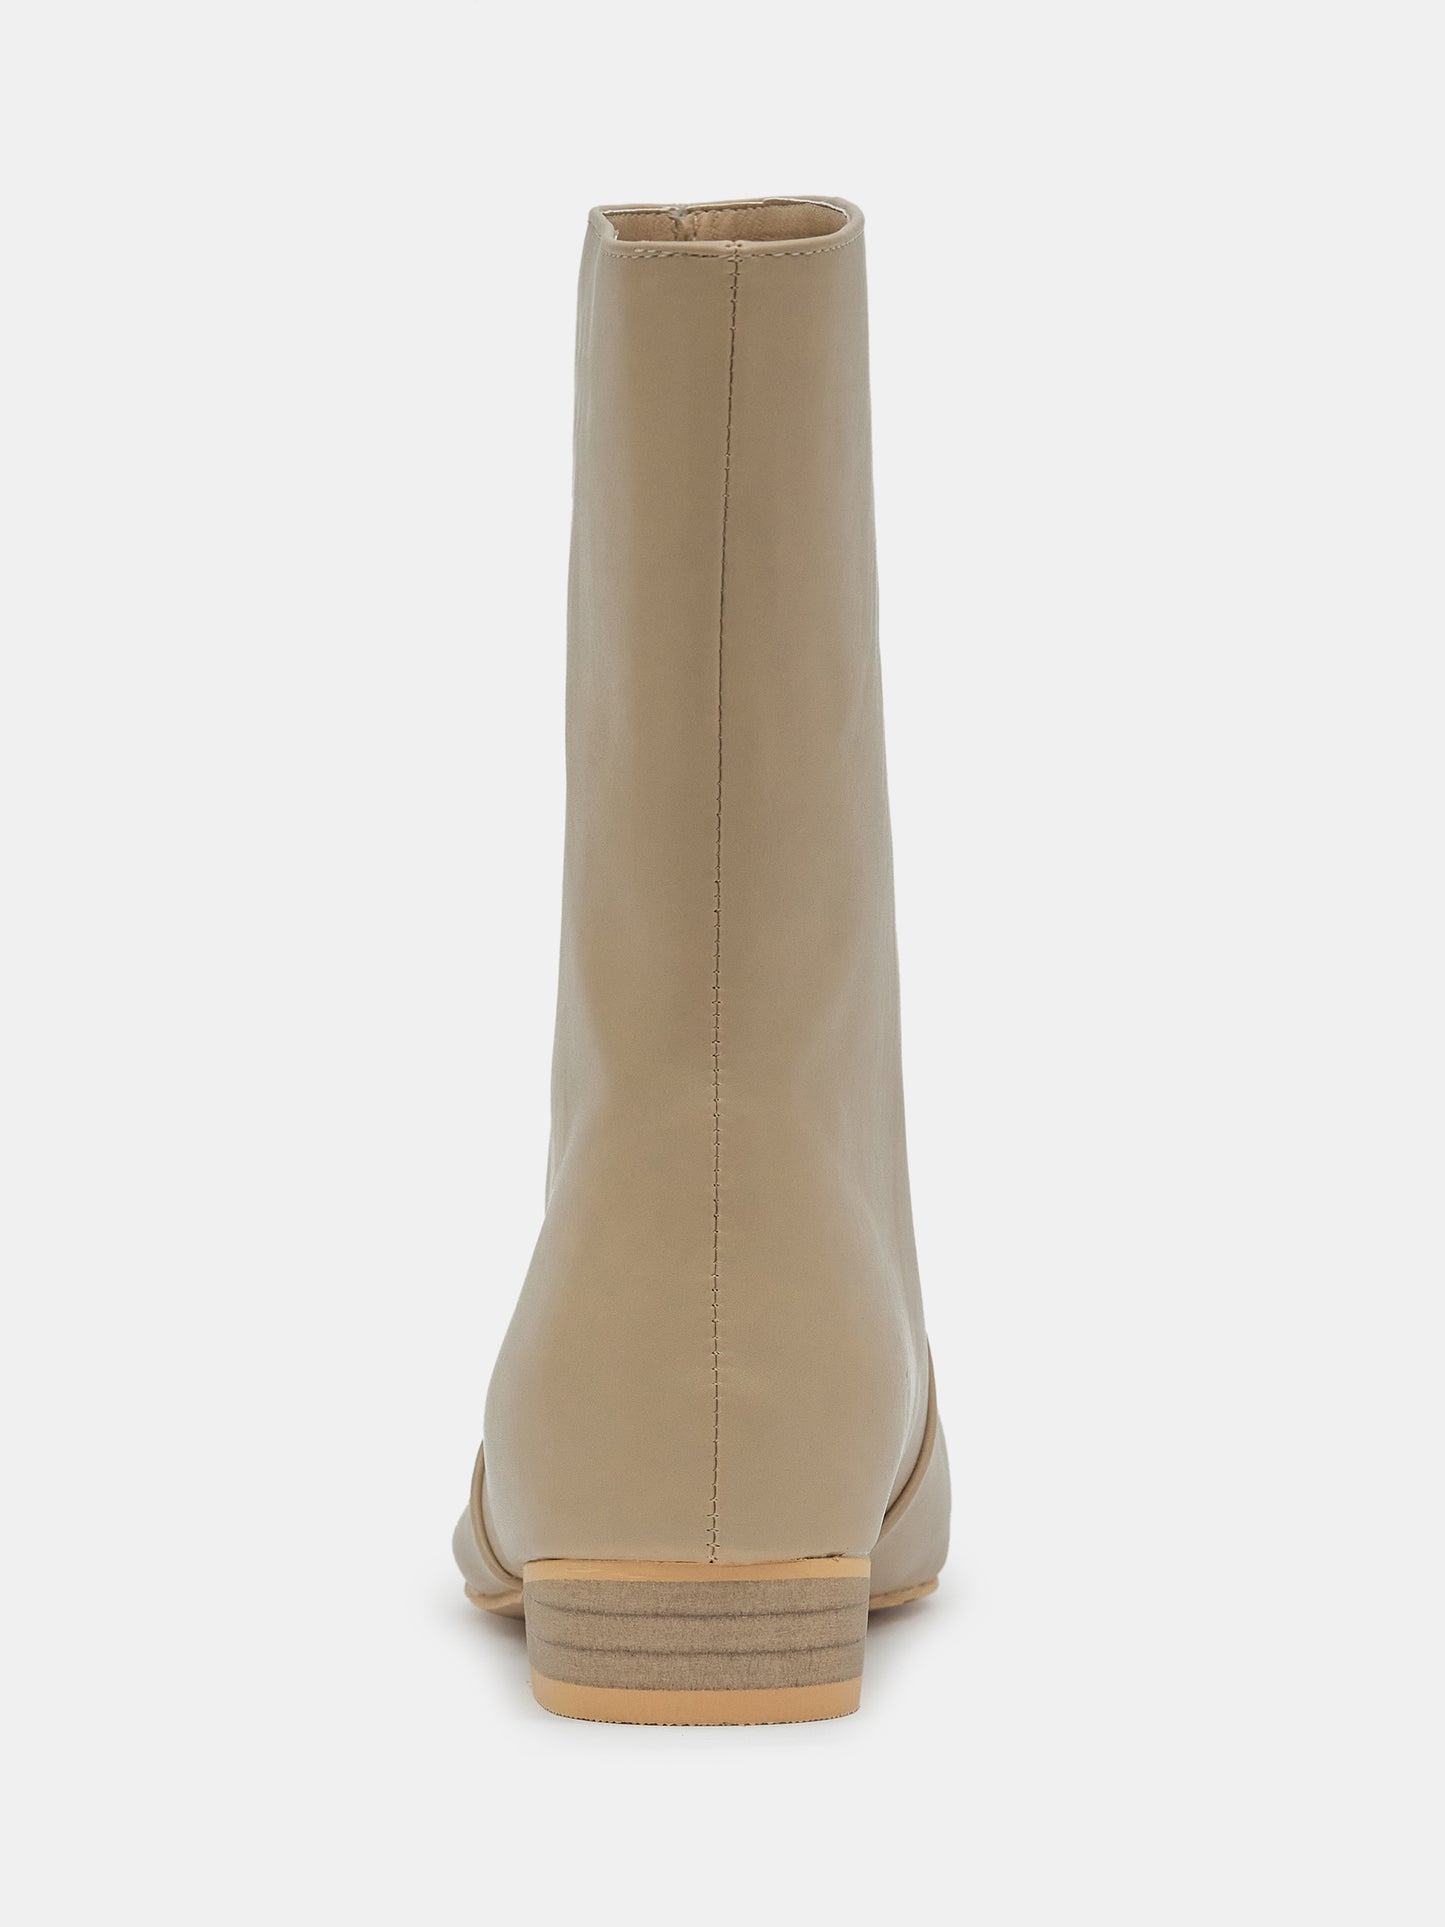 Pointed Mid Calf Boots, Sand